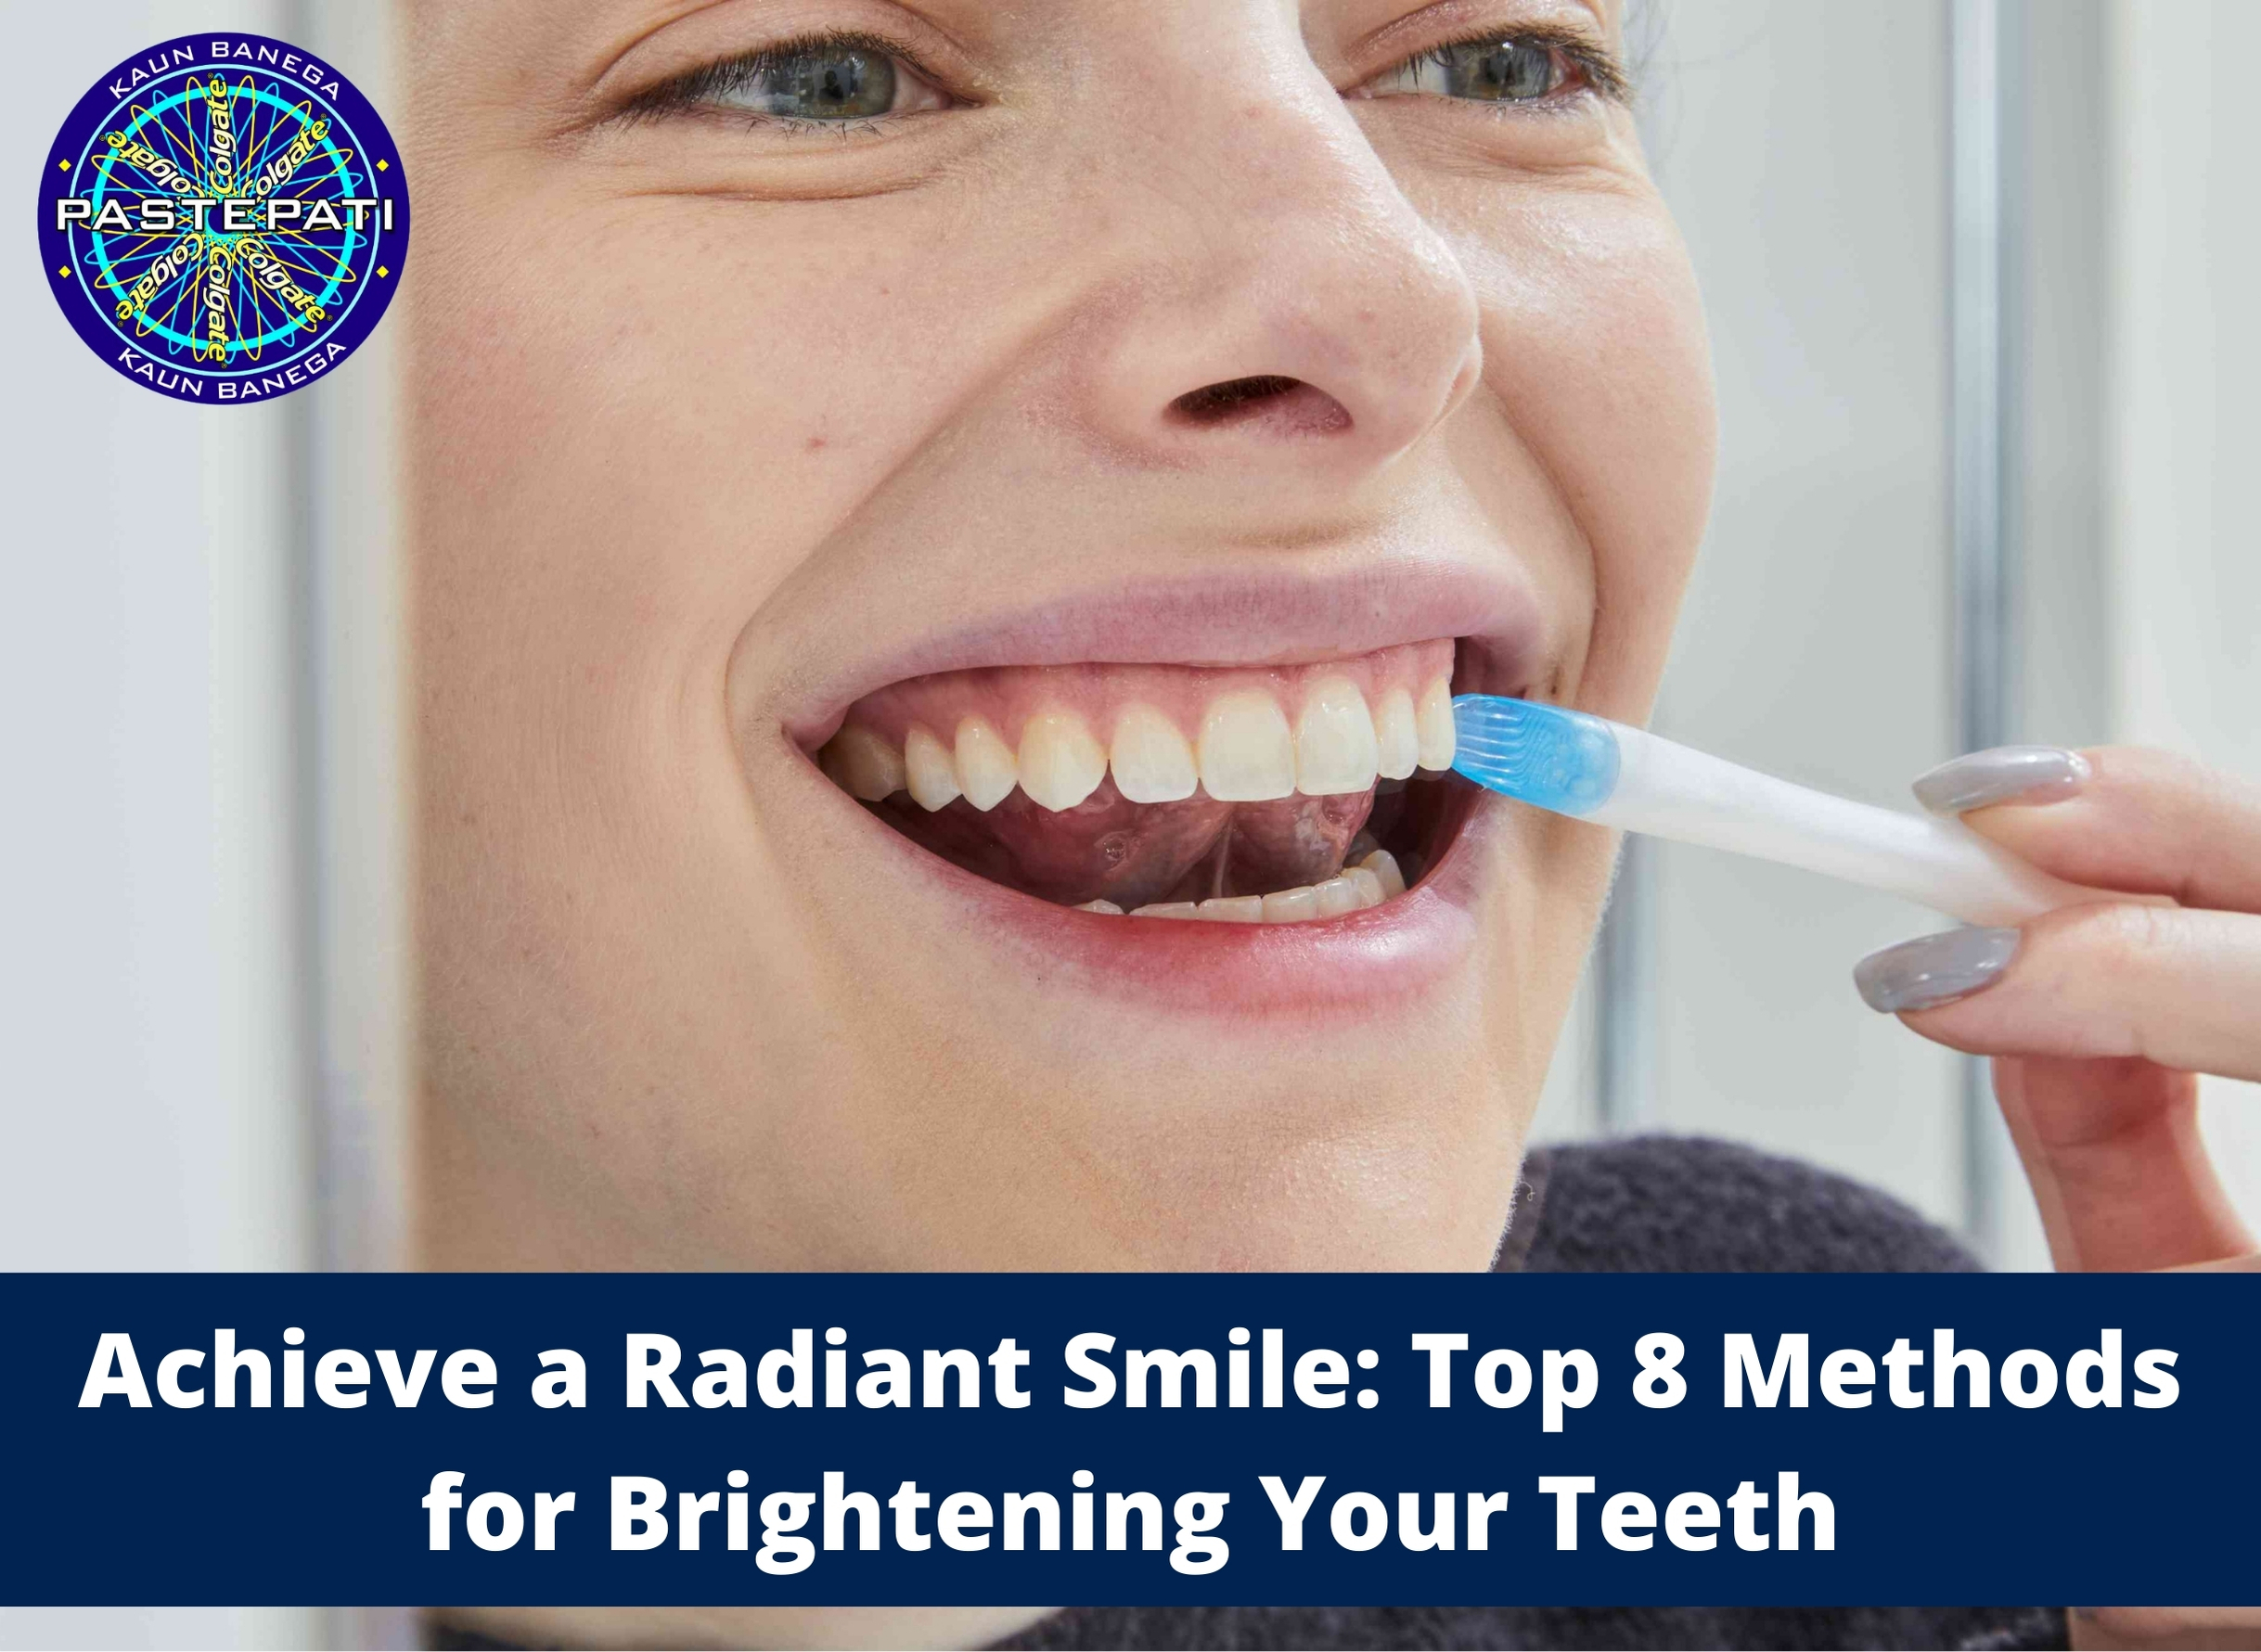 Achieve a Radiant Smile: Top 8 Methods for Brightening Your Teeth